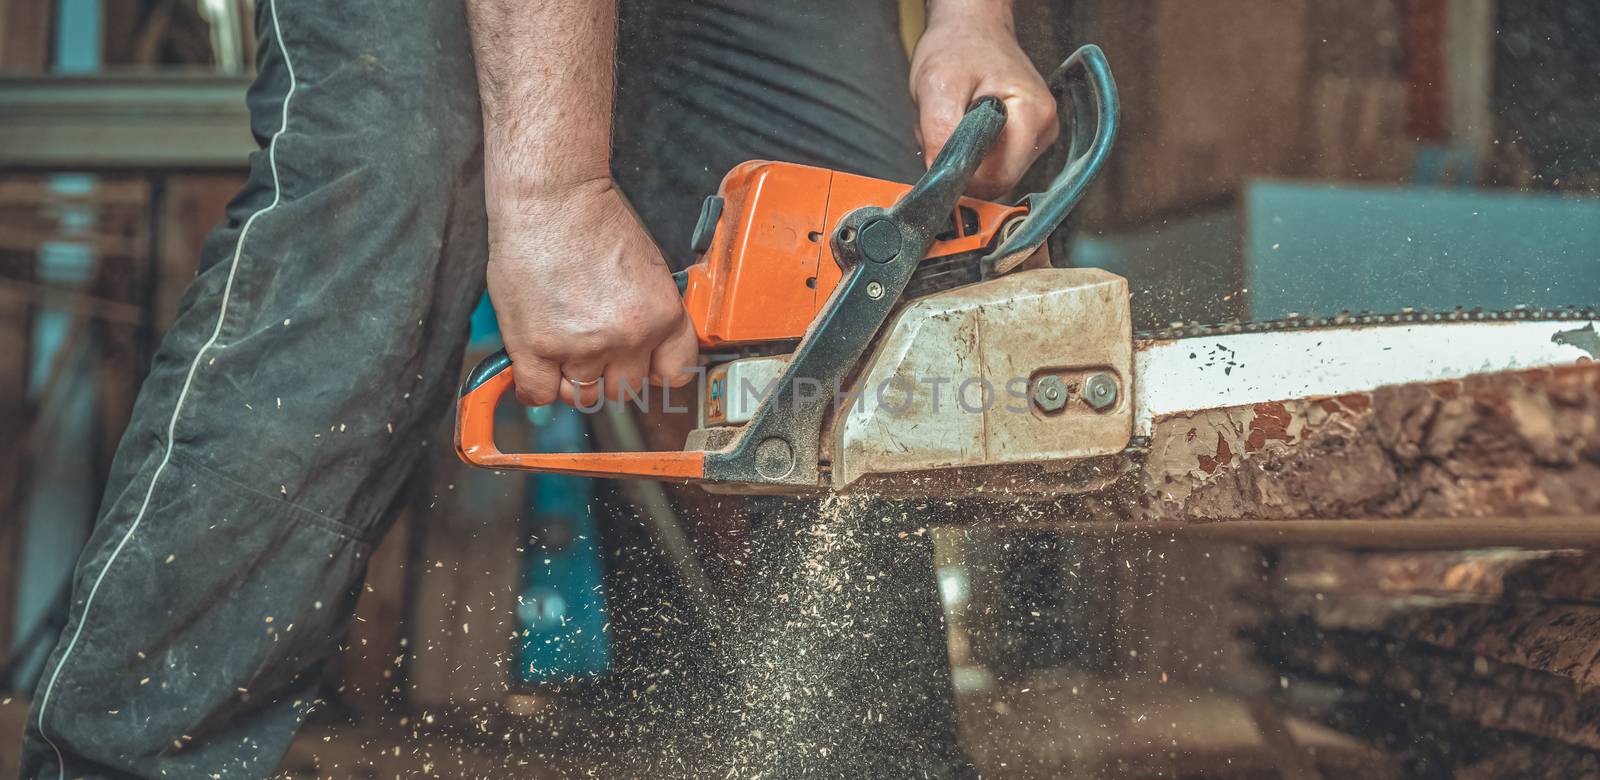 chainsaw in the hands of a carpenter cutting wood